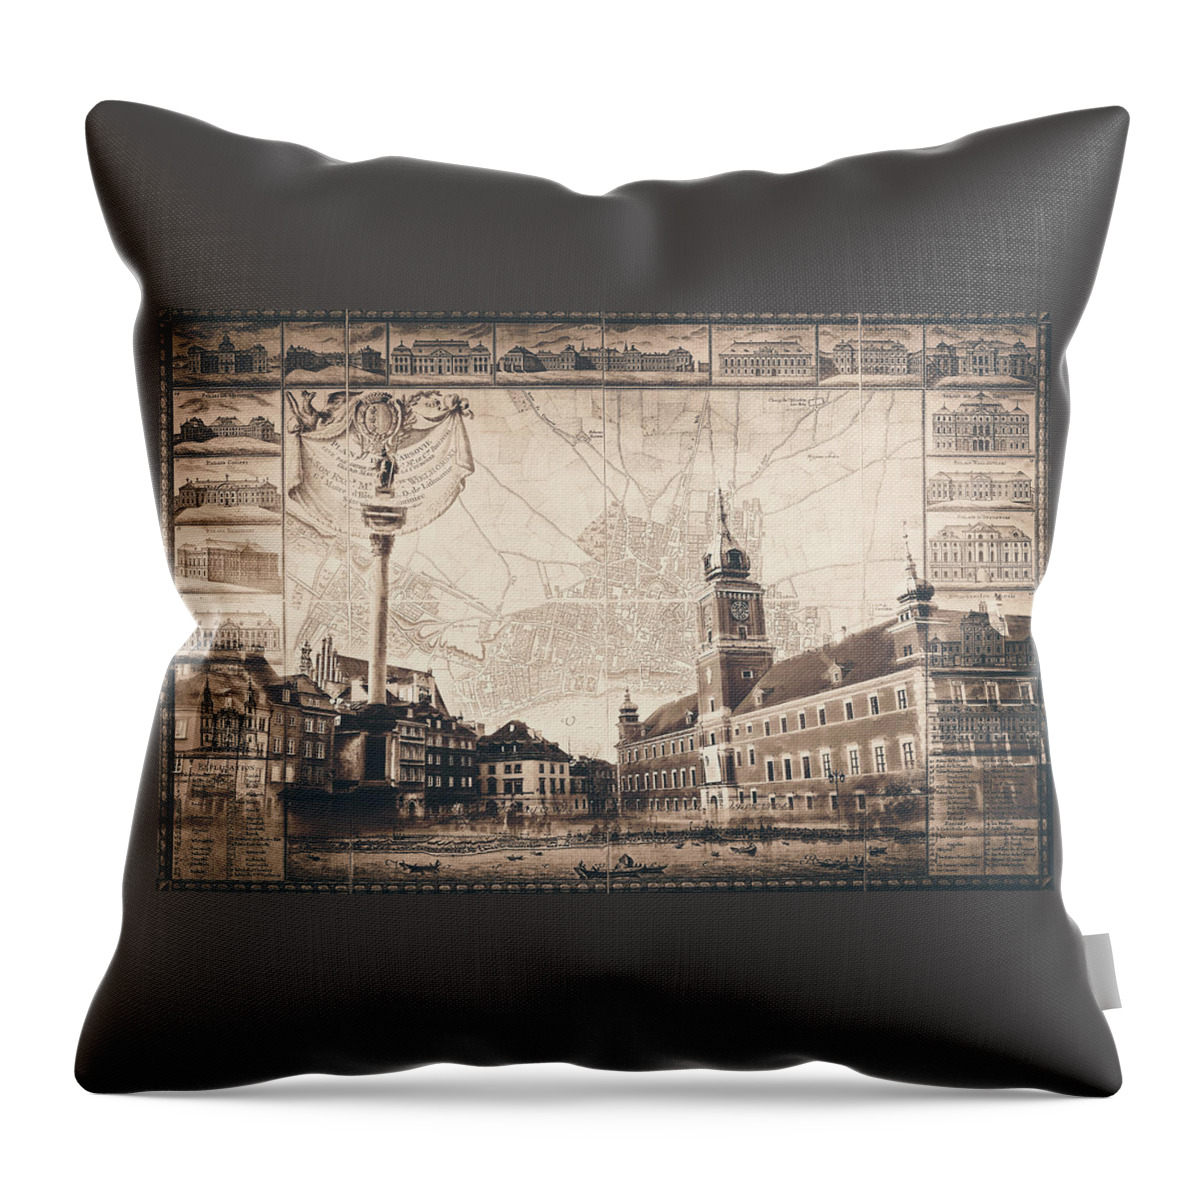 Warsaw Throw Pillow featuring the photograph Castle Square Warsaw Poland With Vintage Map Nostalgic Sepia by Carol Japp